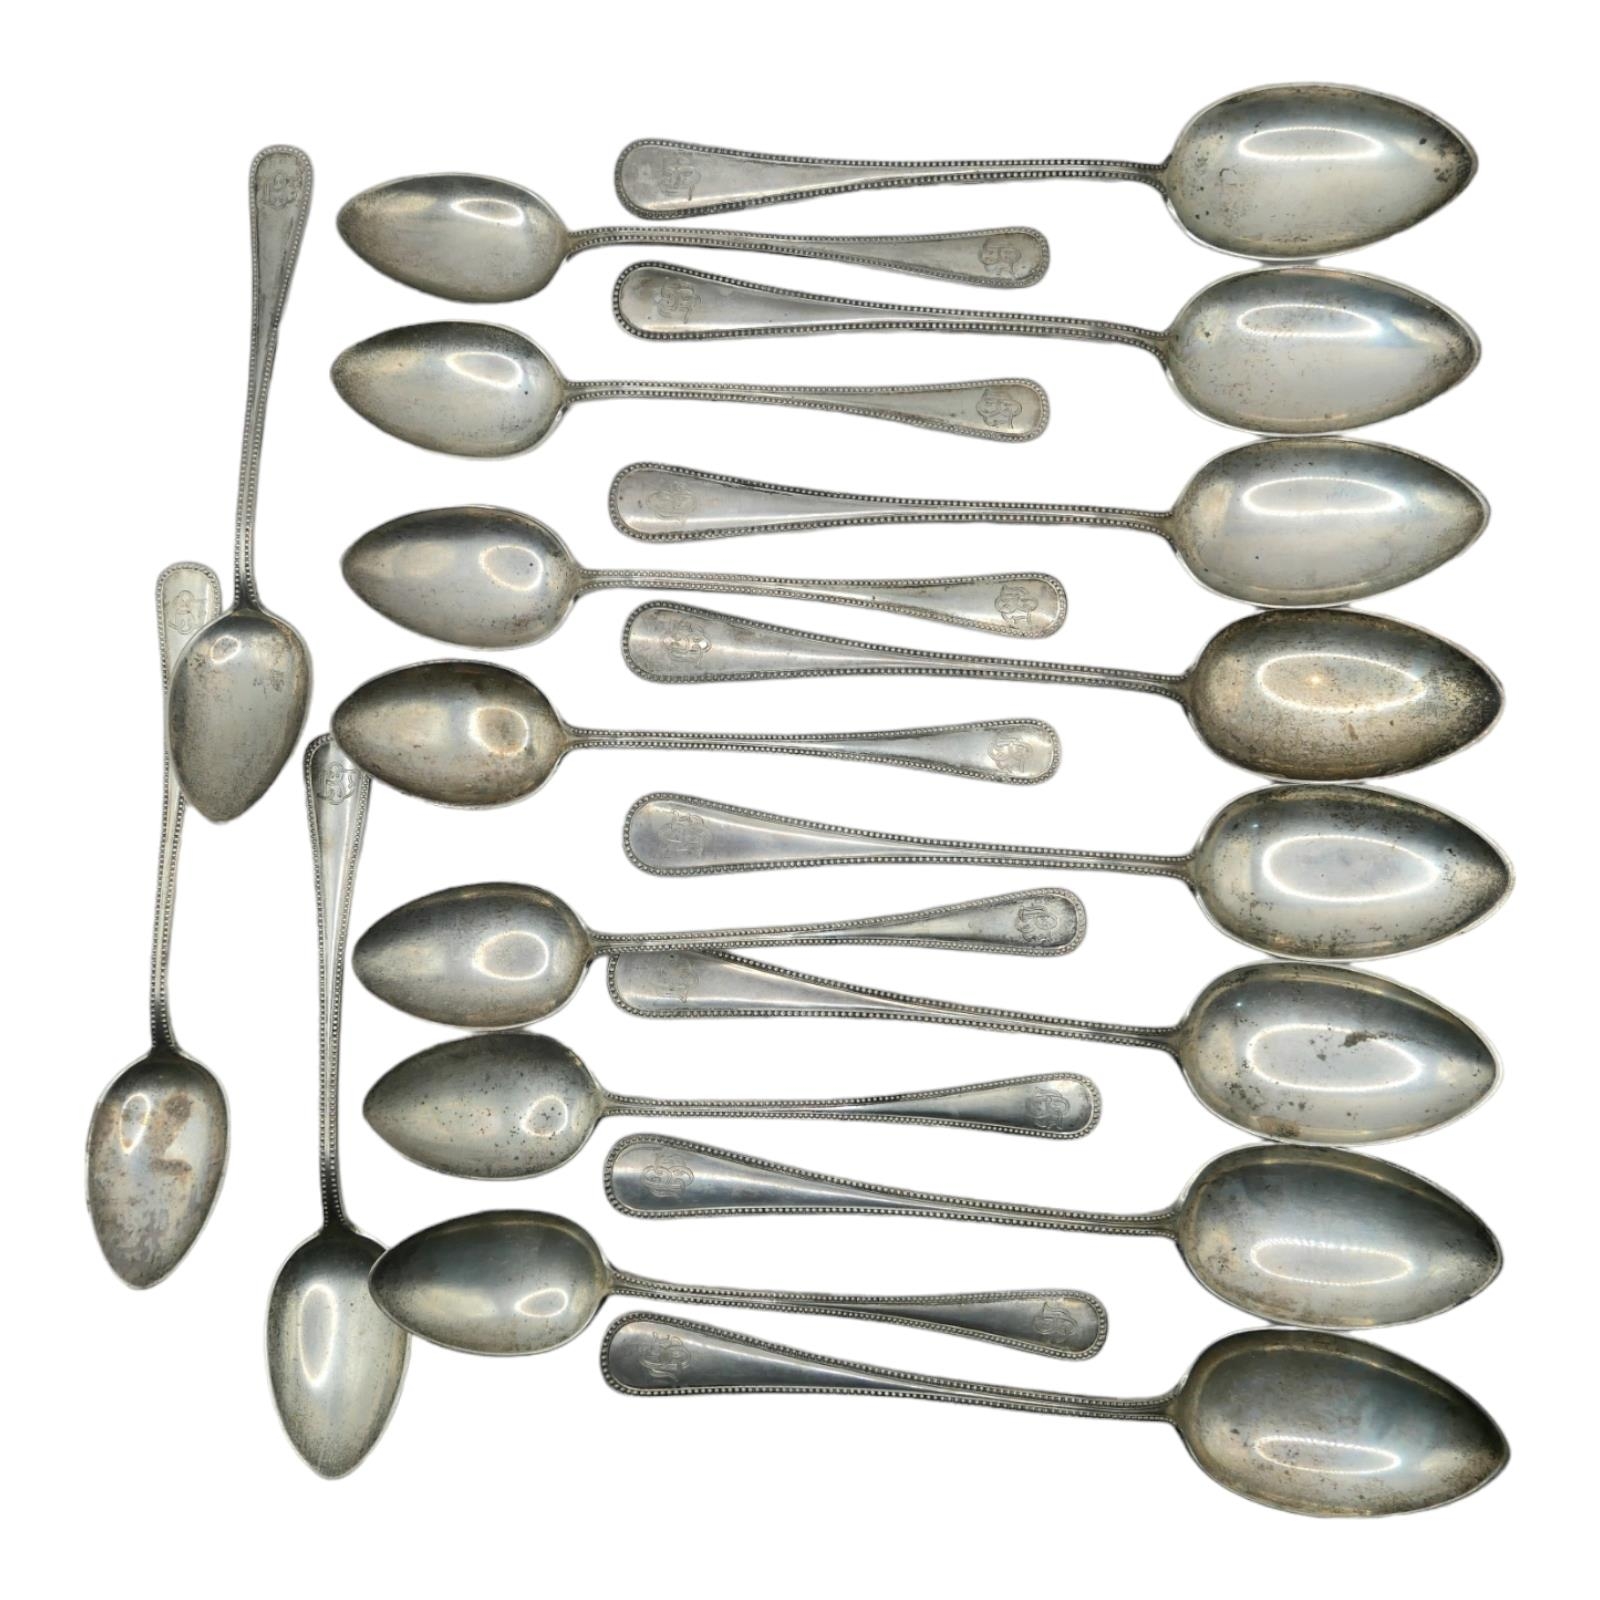 J. TOSTRIP, OSLO, EARLY 20TH CENTURY DANISH SILVER FLATWARE, CIRCA 1918 J. Tostrup, Oslo. Early 20th - Image 6 of 7